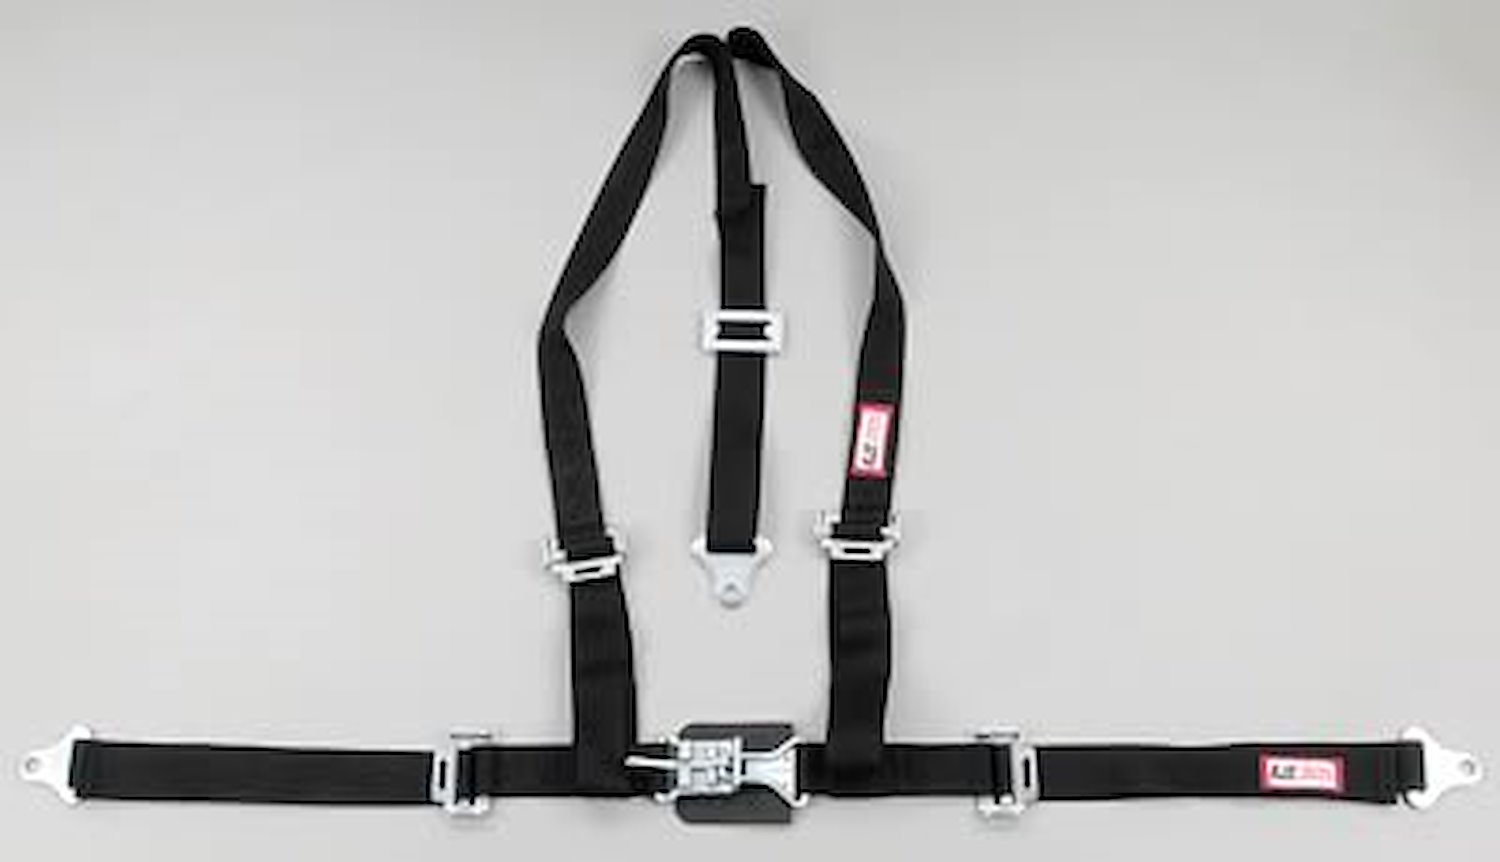 NON-SFI L&L HARNESS 2 PULL UP Lap Belt w/Adjuster SNAP 2 S.H. Individual ROLL BAR MOUNT w/STERNUM STRAP WRAP/SNAP GRAY